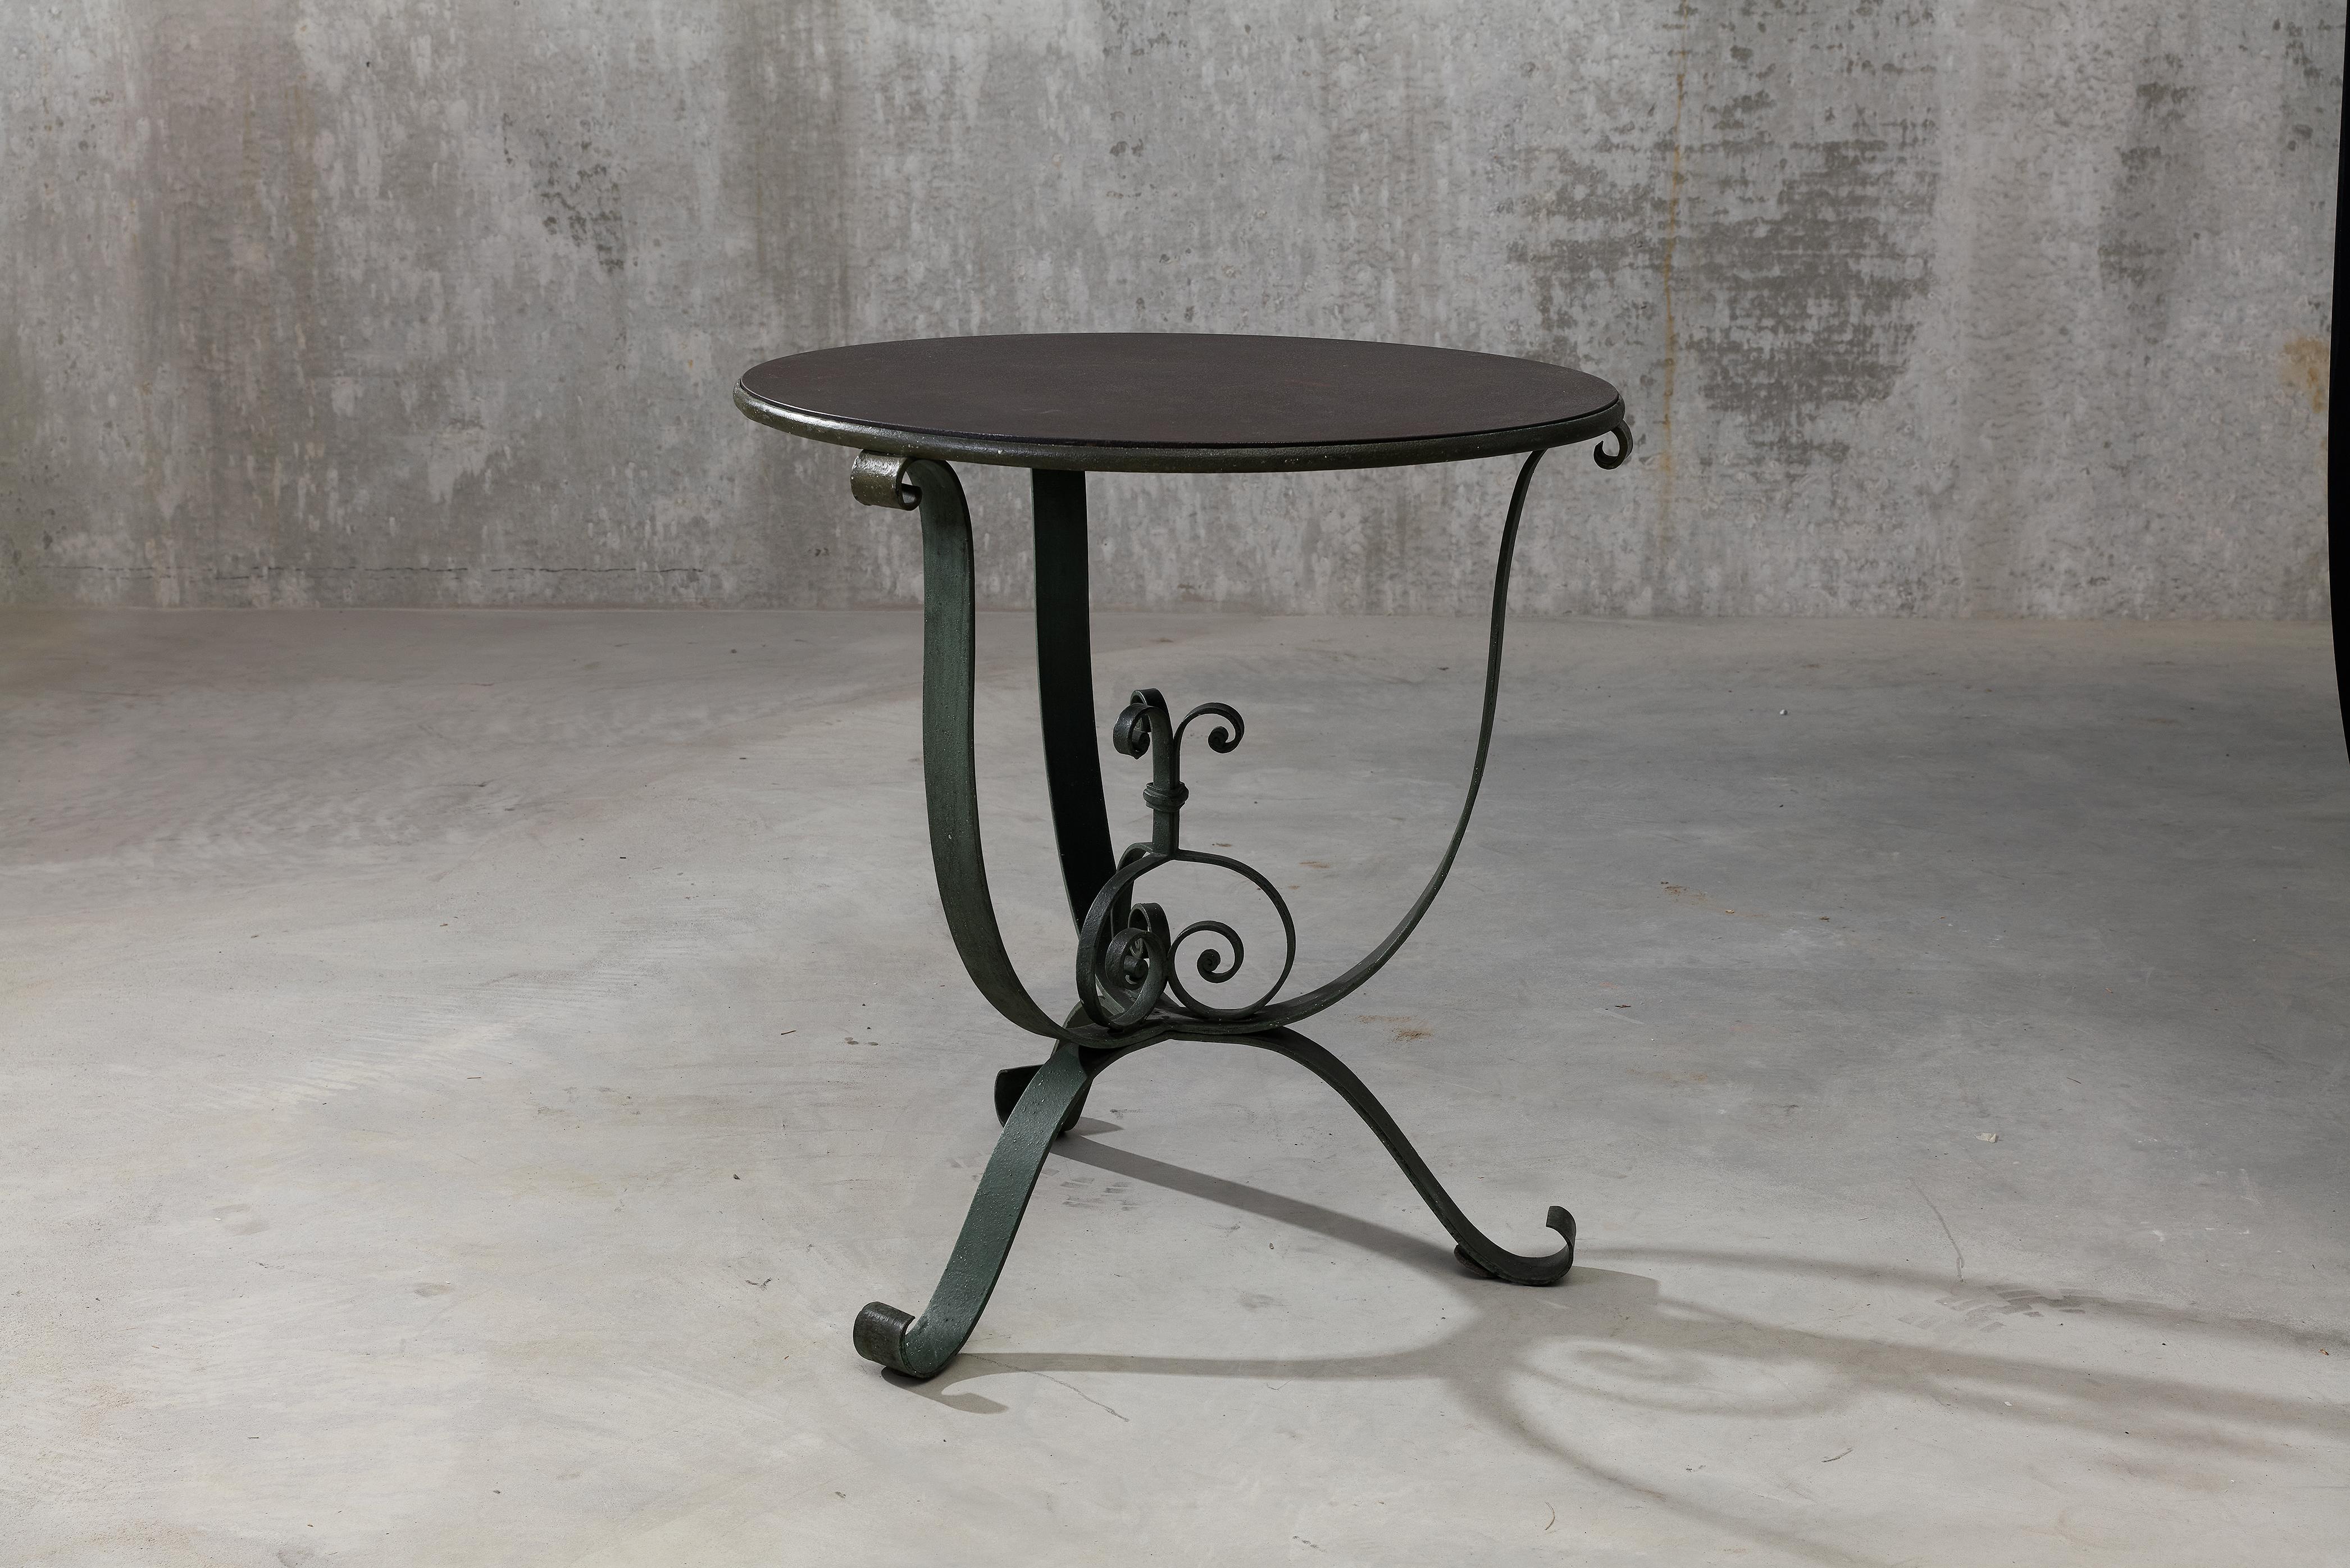 An elegant French wrought iron garden table from the 1920s or 1930s. A brown, rust colored patinated round table top is placed on three green patinated scrolling legs, with a decorative scroll decoration between the table legs. The original patina